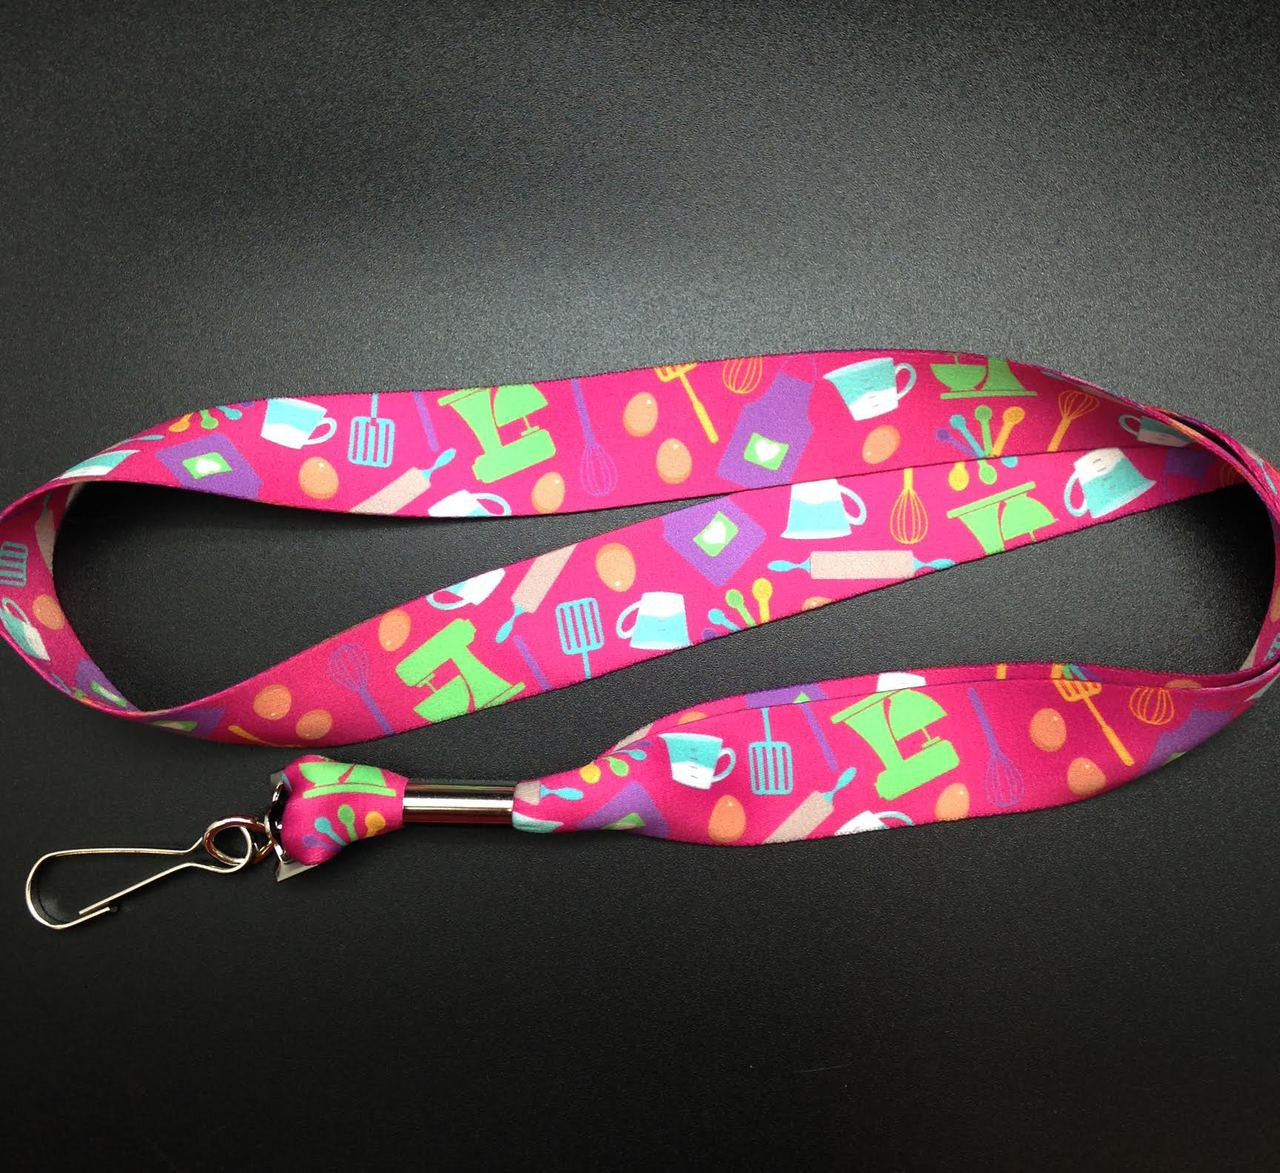 Lanyard featuring baking elements on a pink background 1"  soft webbing